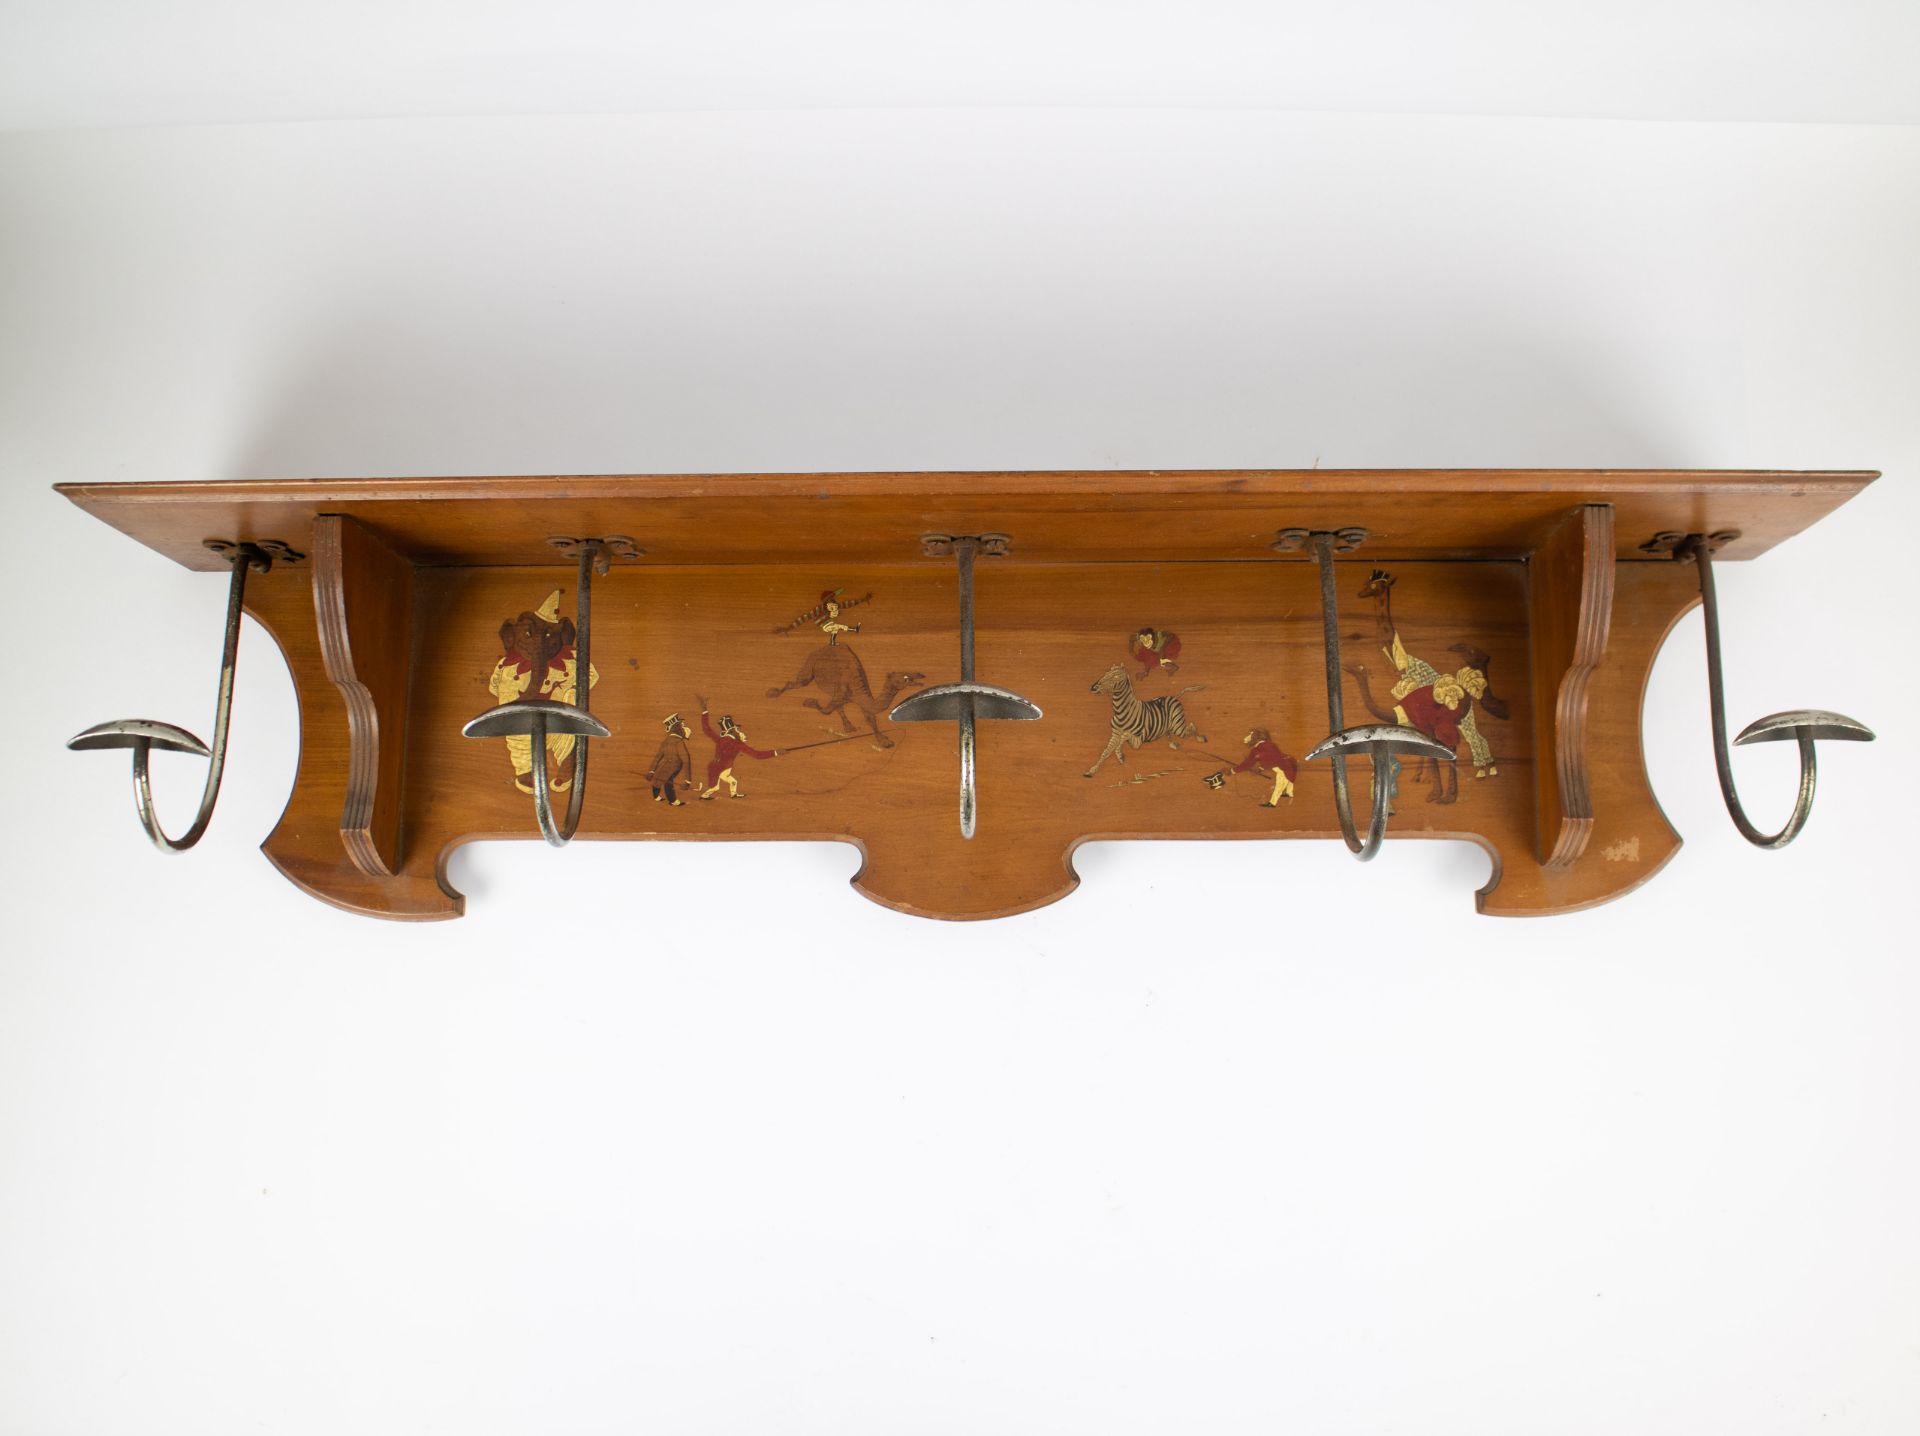 English coat rack ca 1900 hand-painted with circus animals